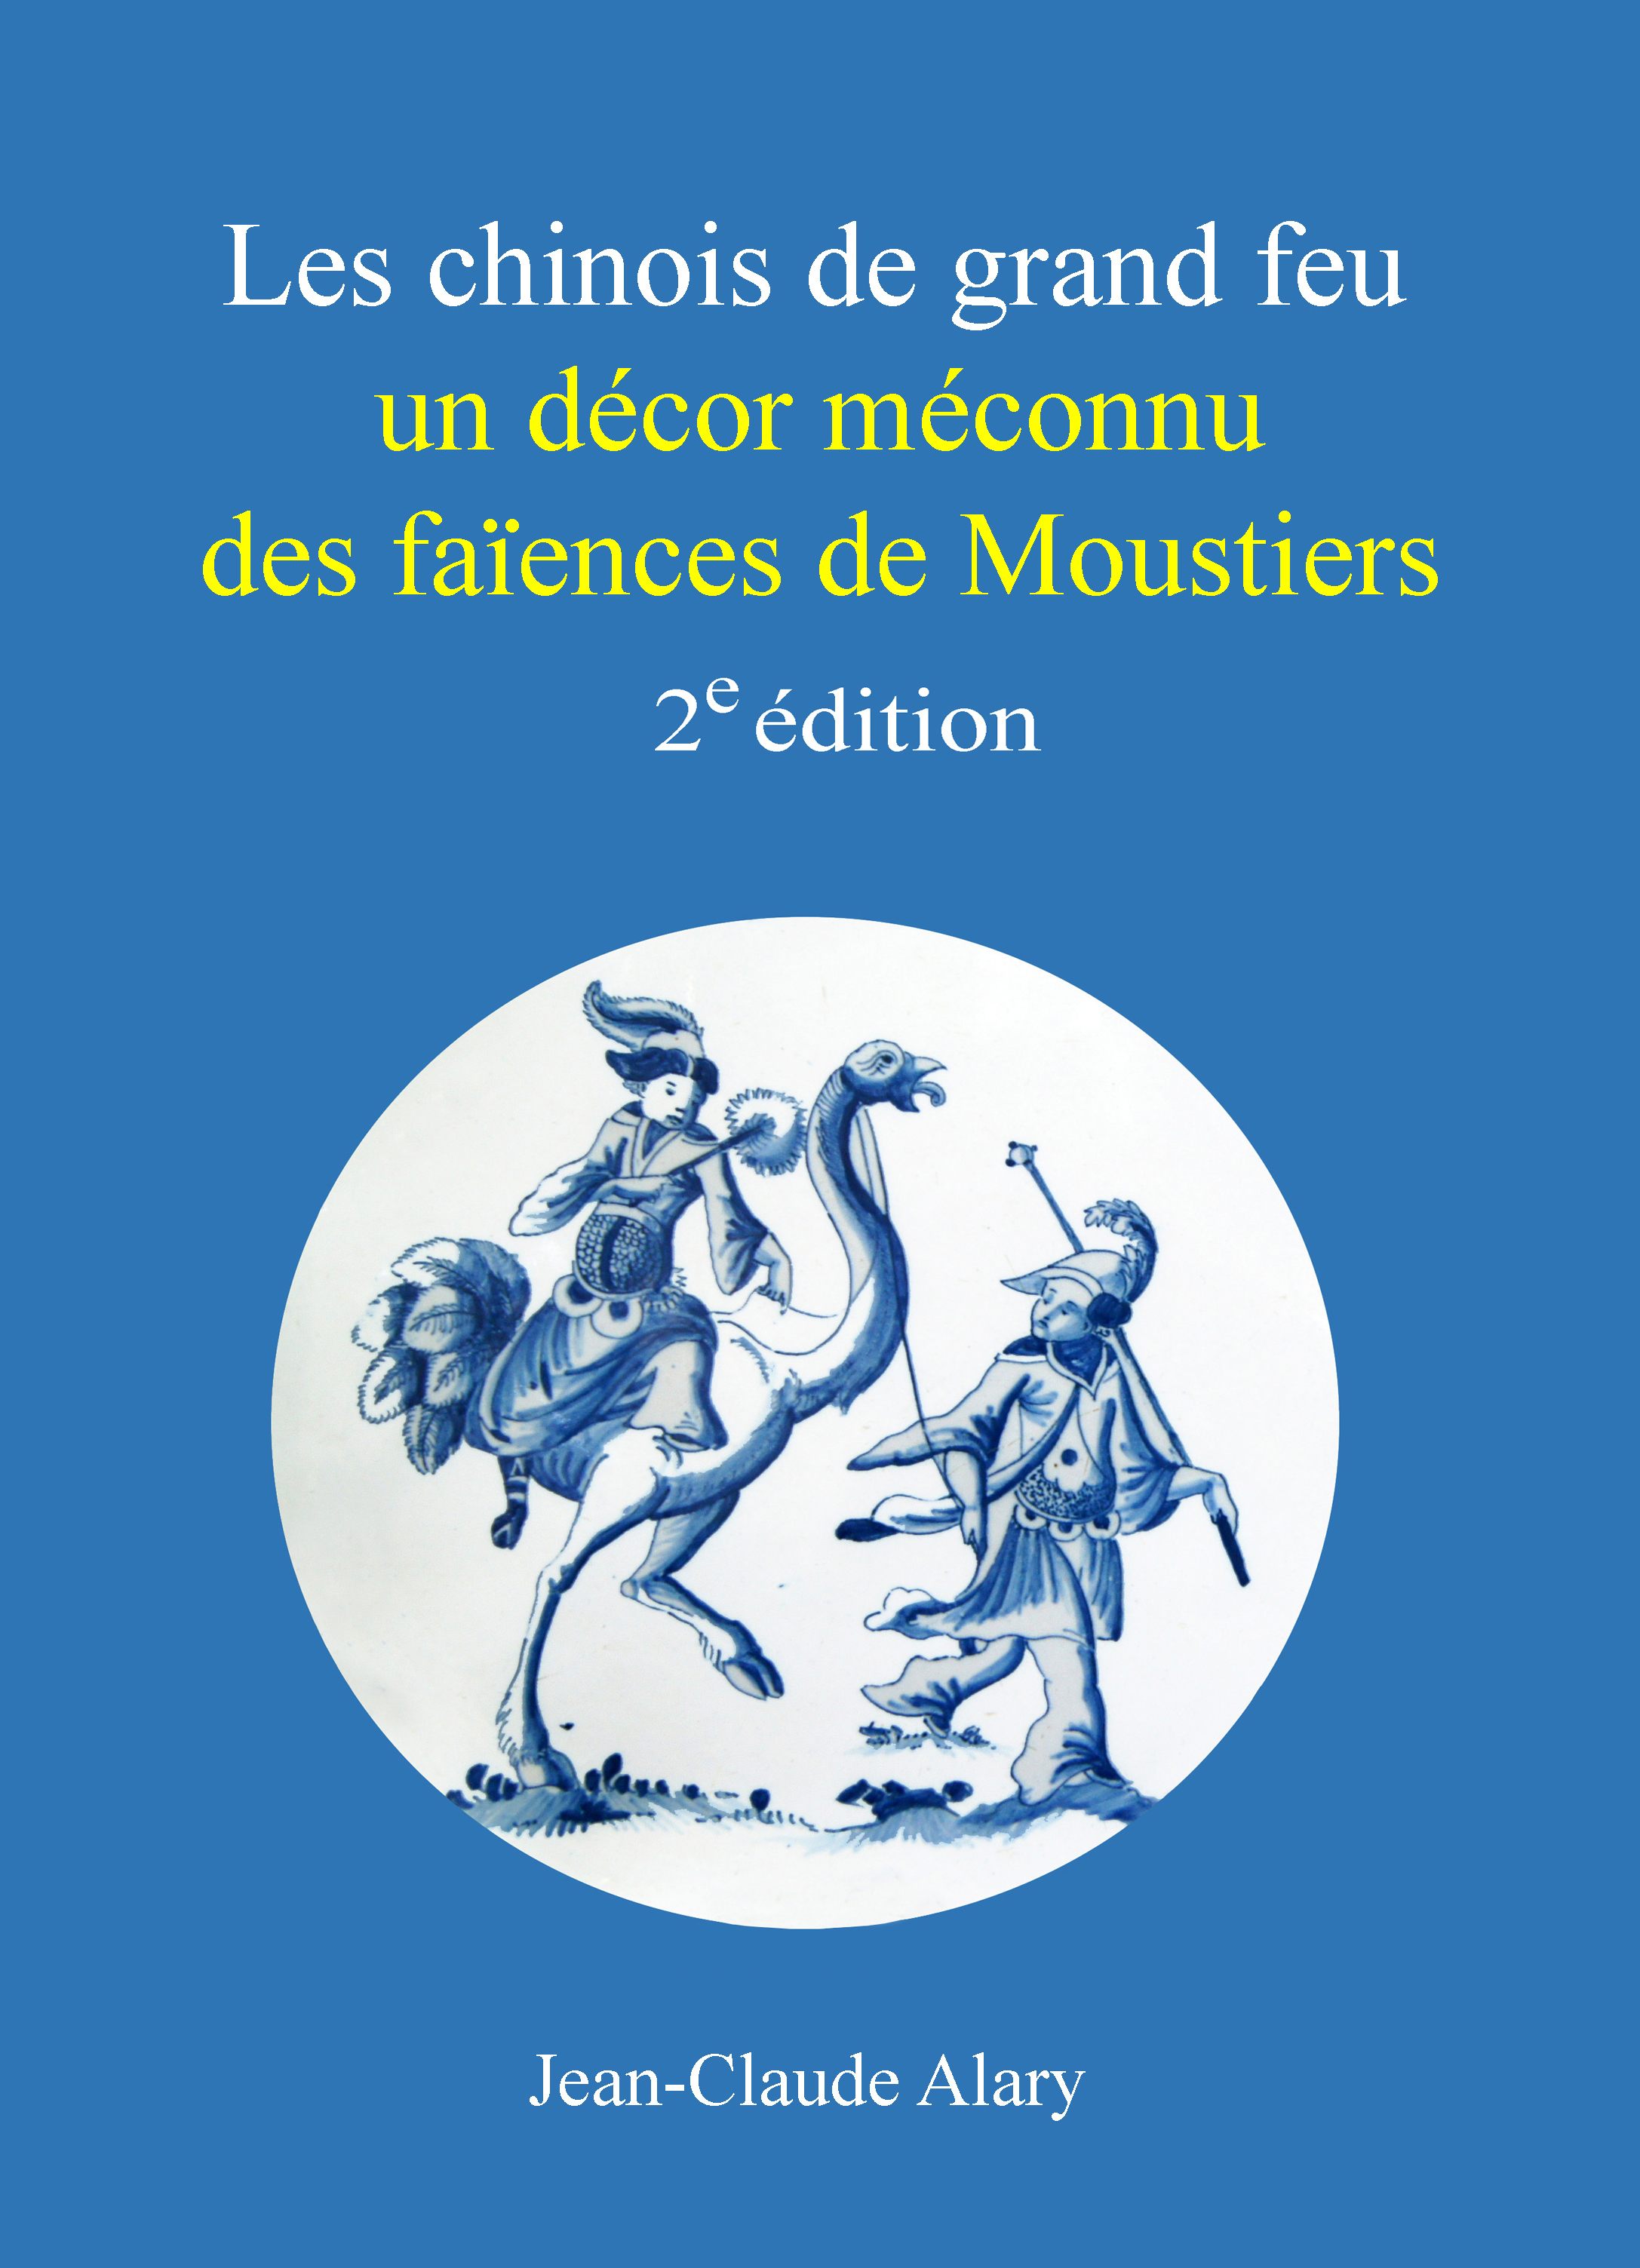 Couverture chinois Moustiers